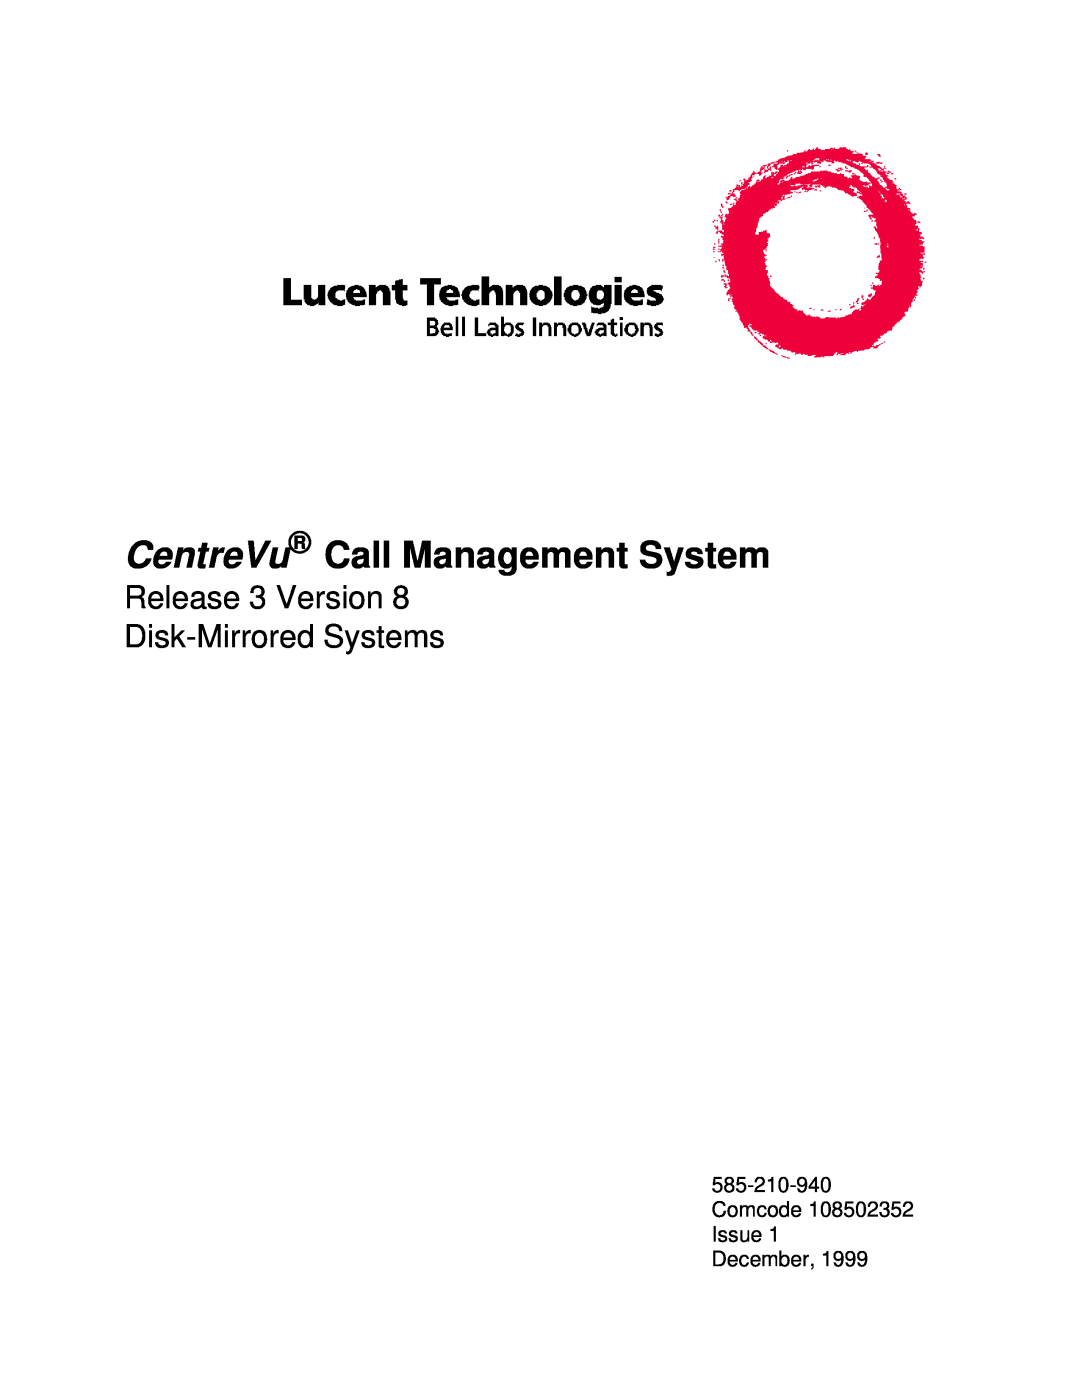 Lucent Technologies manual 585-210-940Comcode 108502352 Issue 1 December, CentreVu Call Management System 